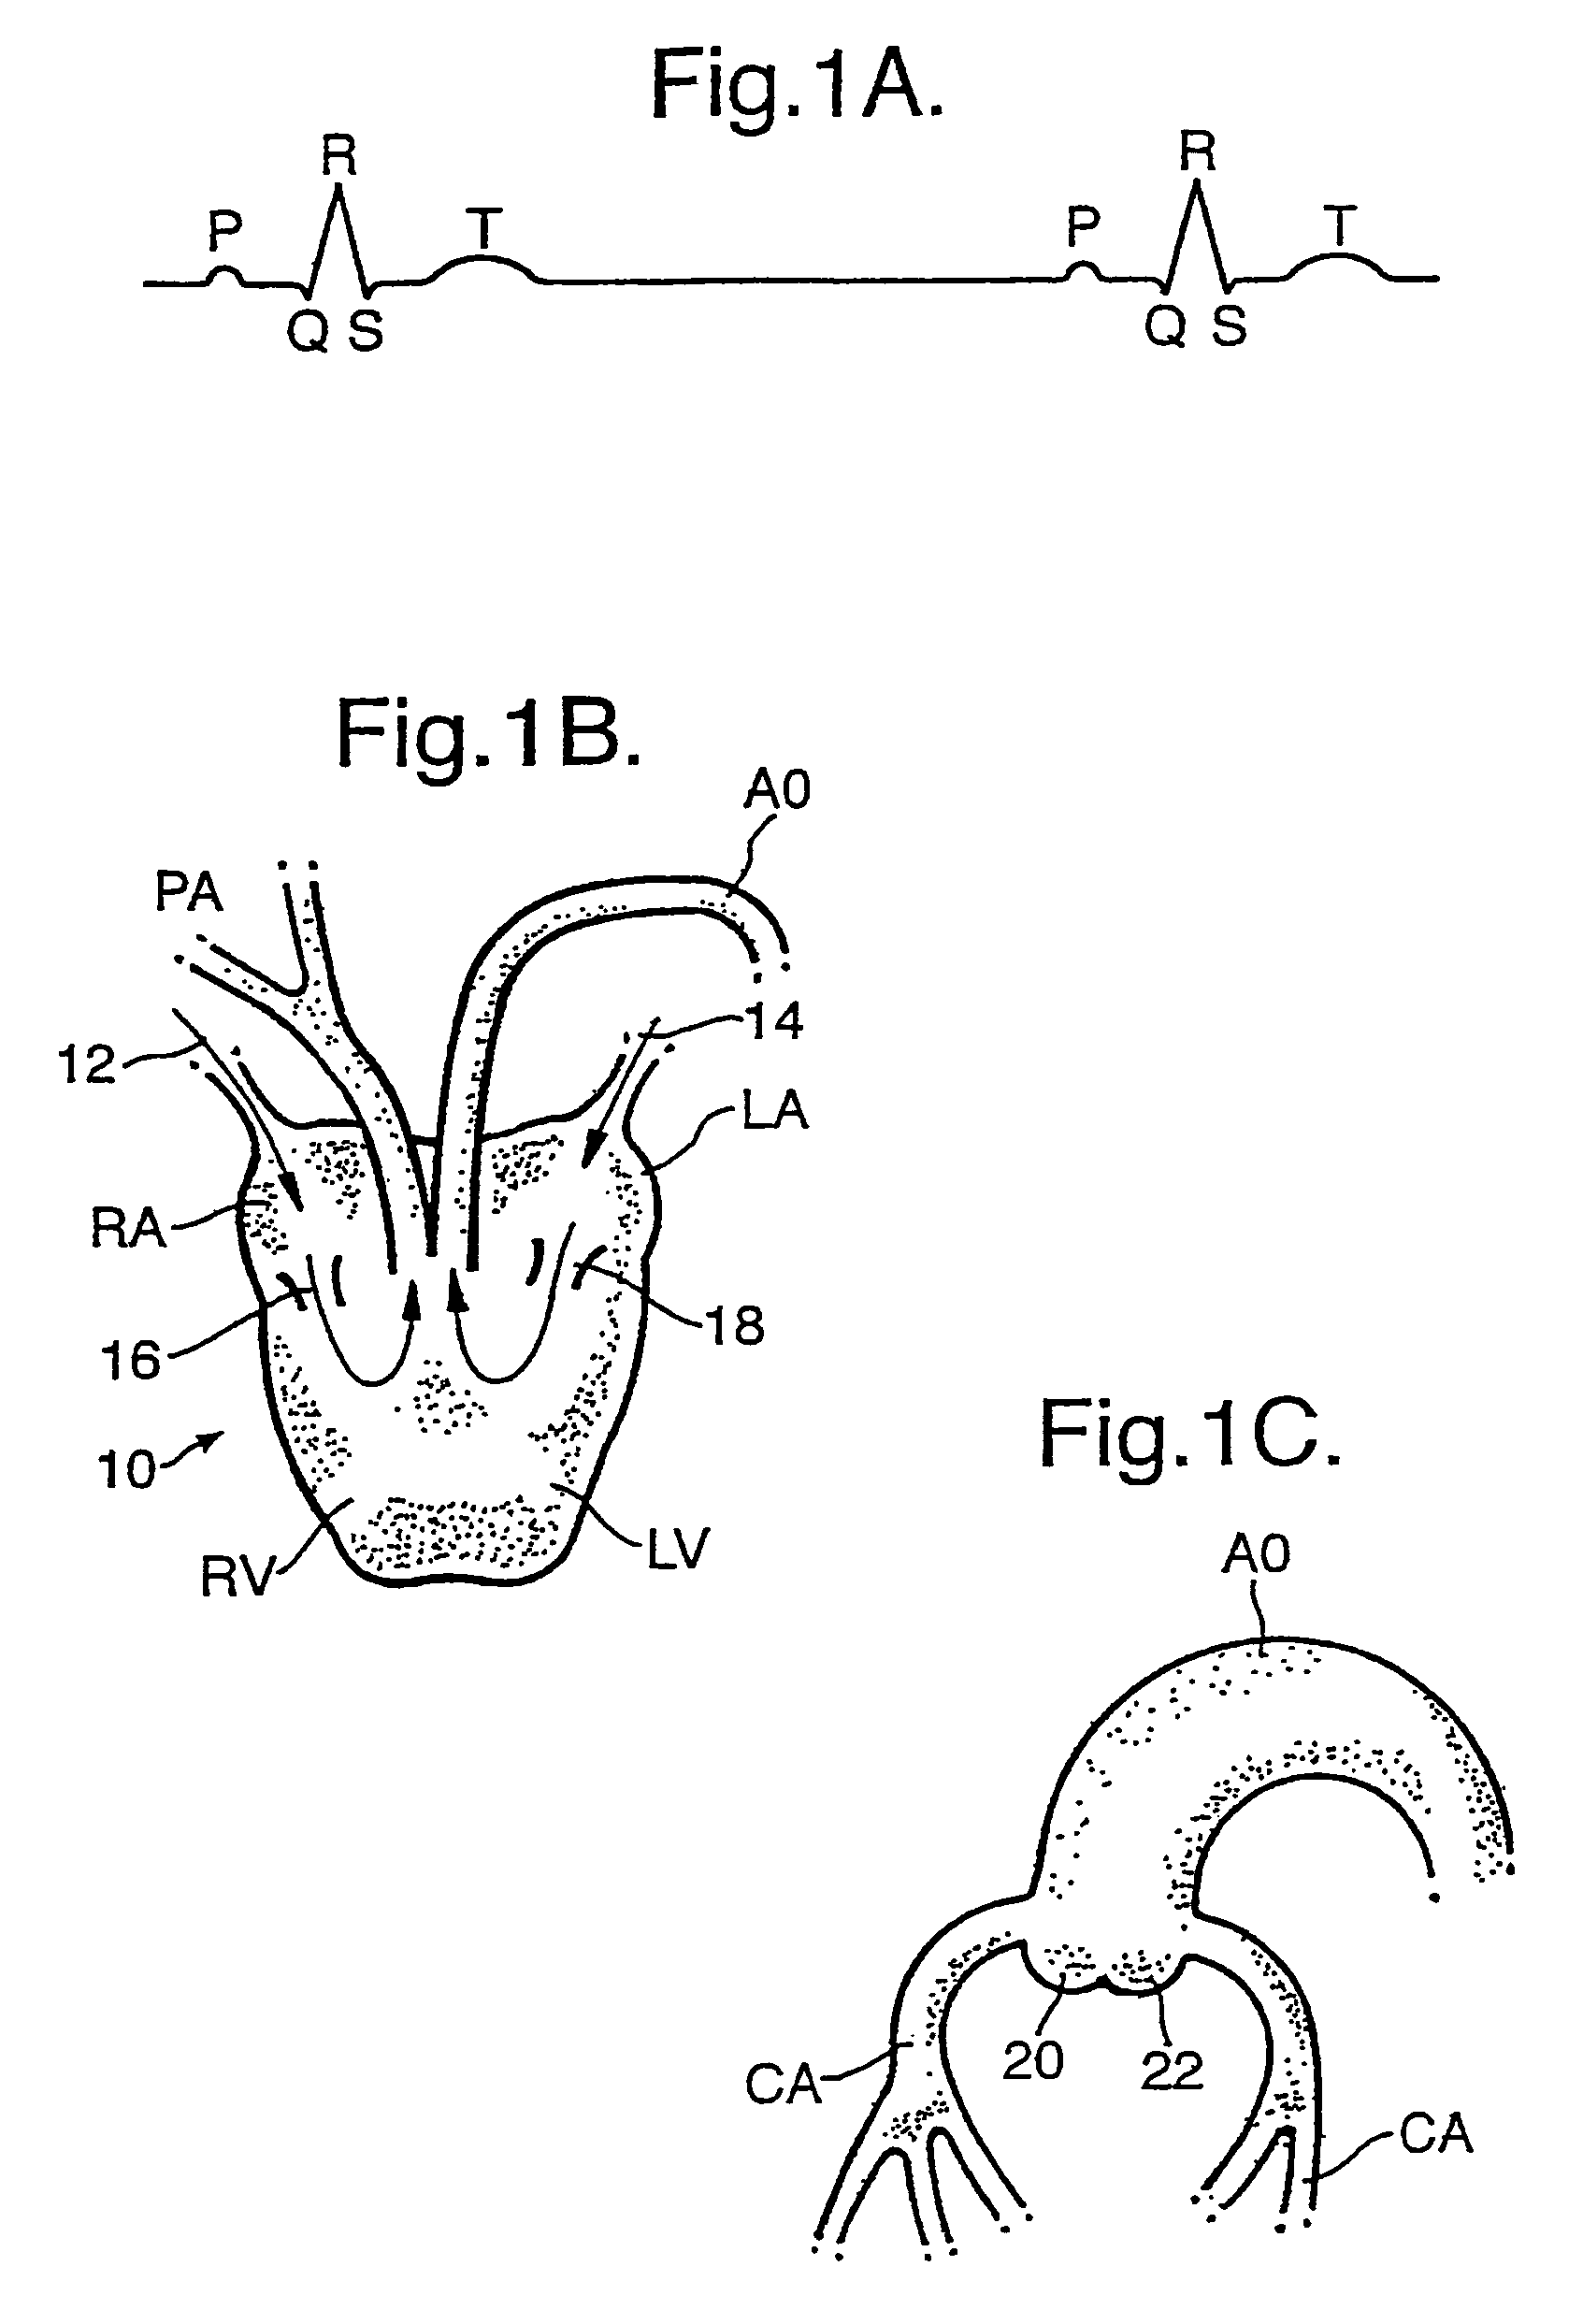 Counter pulsation electrotherapy apparatus for treating a person or a mammal